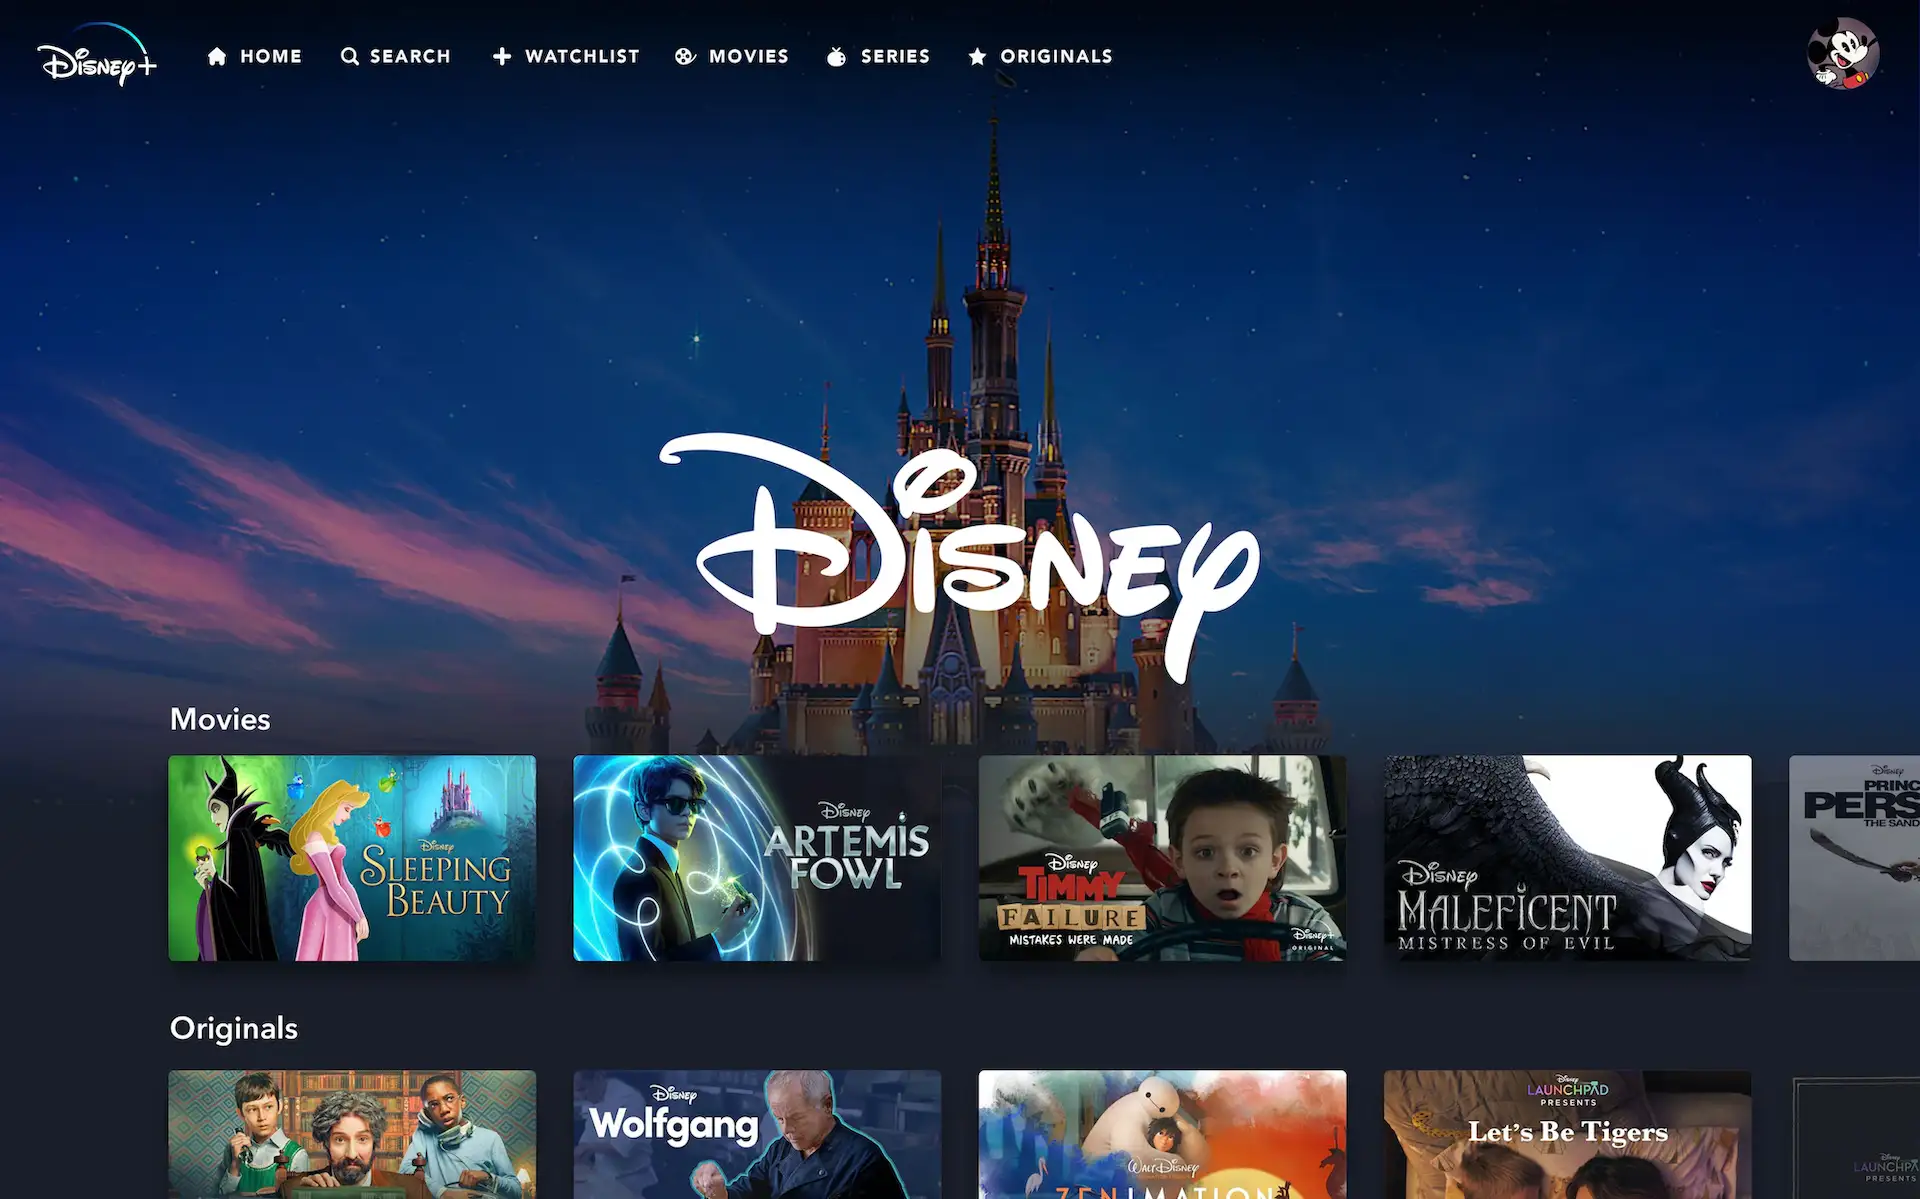 Netflix versus Disney Plus: which one to choose for content, prices and quality?